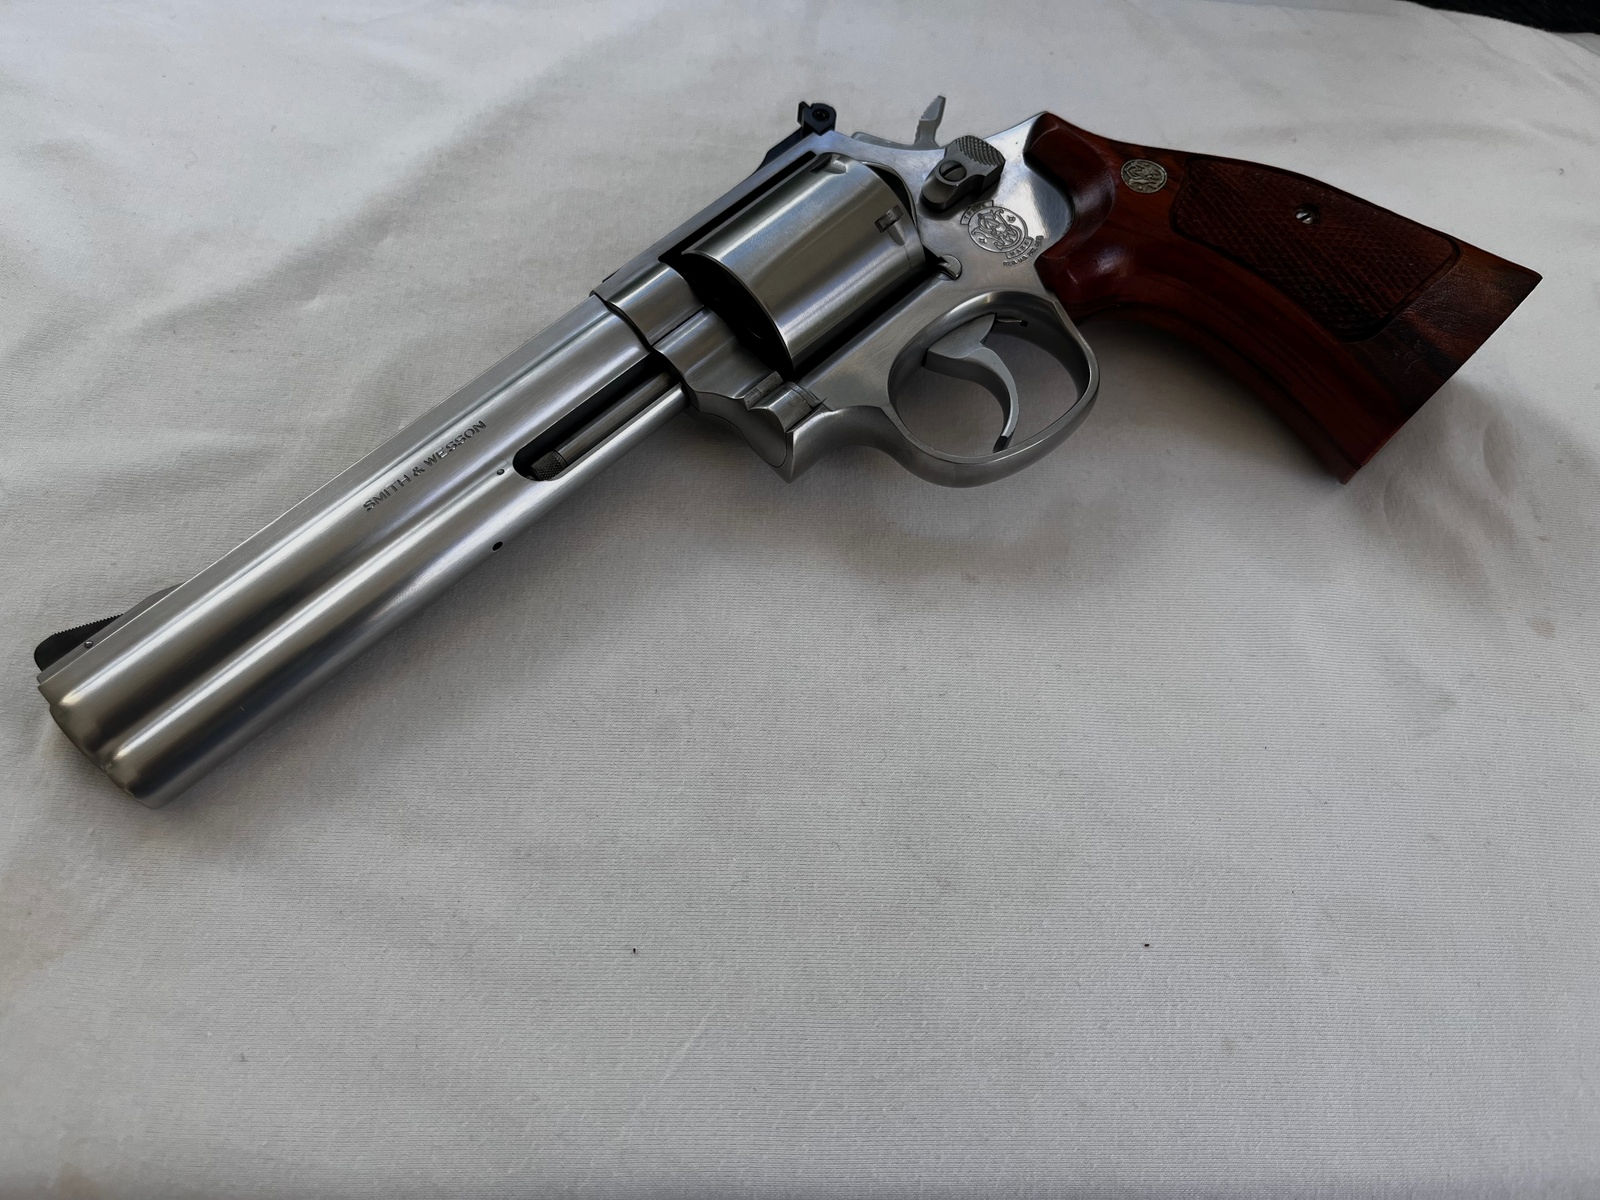 Smith & Wesson S&W 686 6‘‘ .357 Magnum